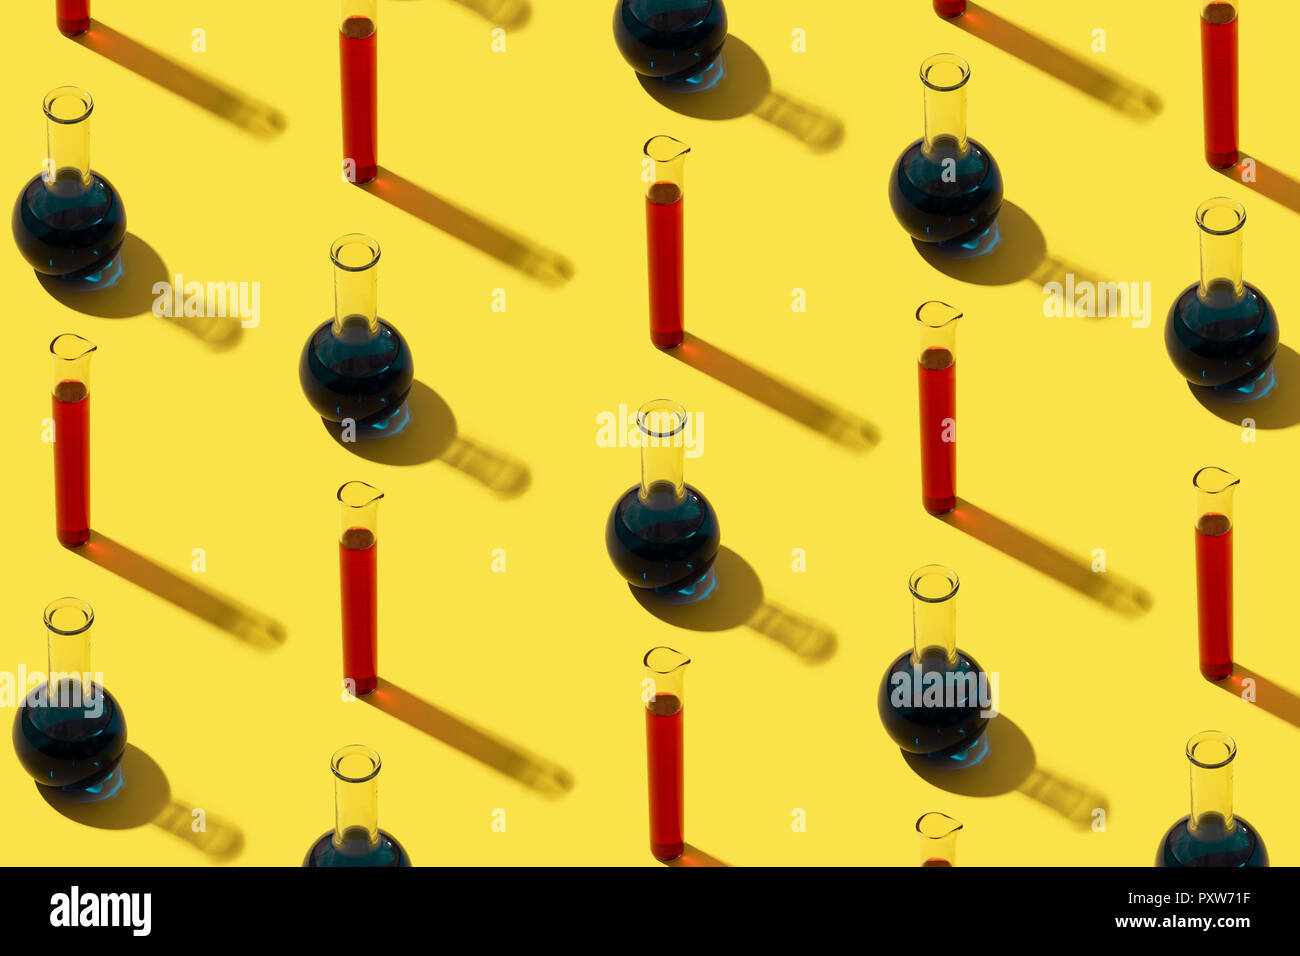 Row of test tubes with liquid, yellow background Stock Photo